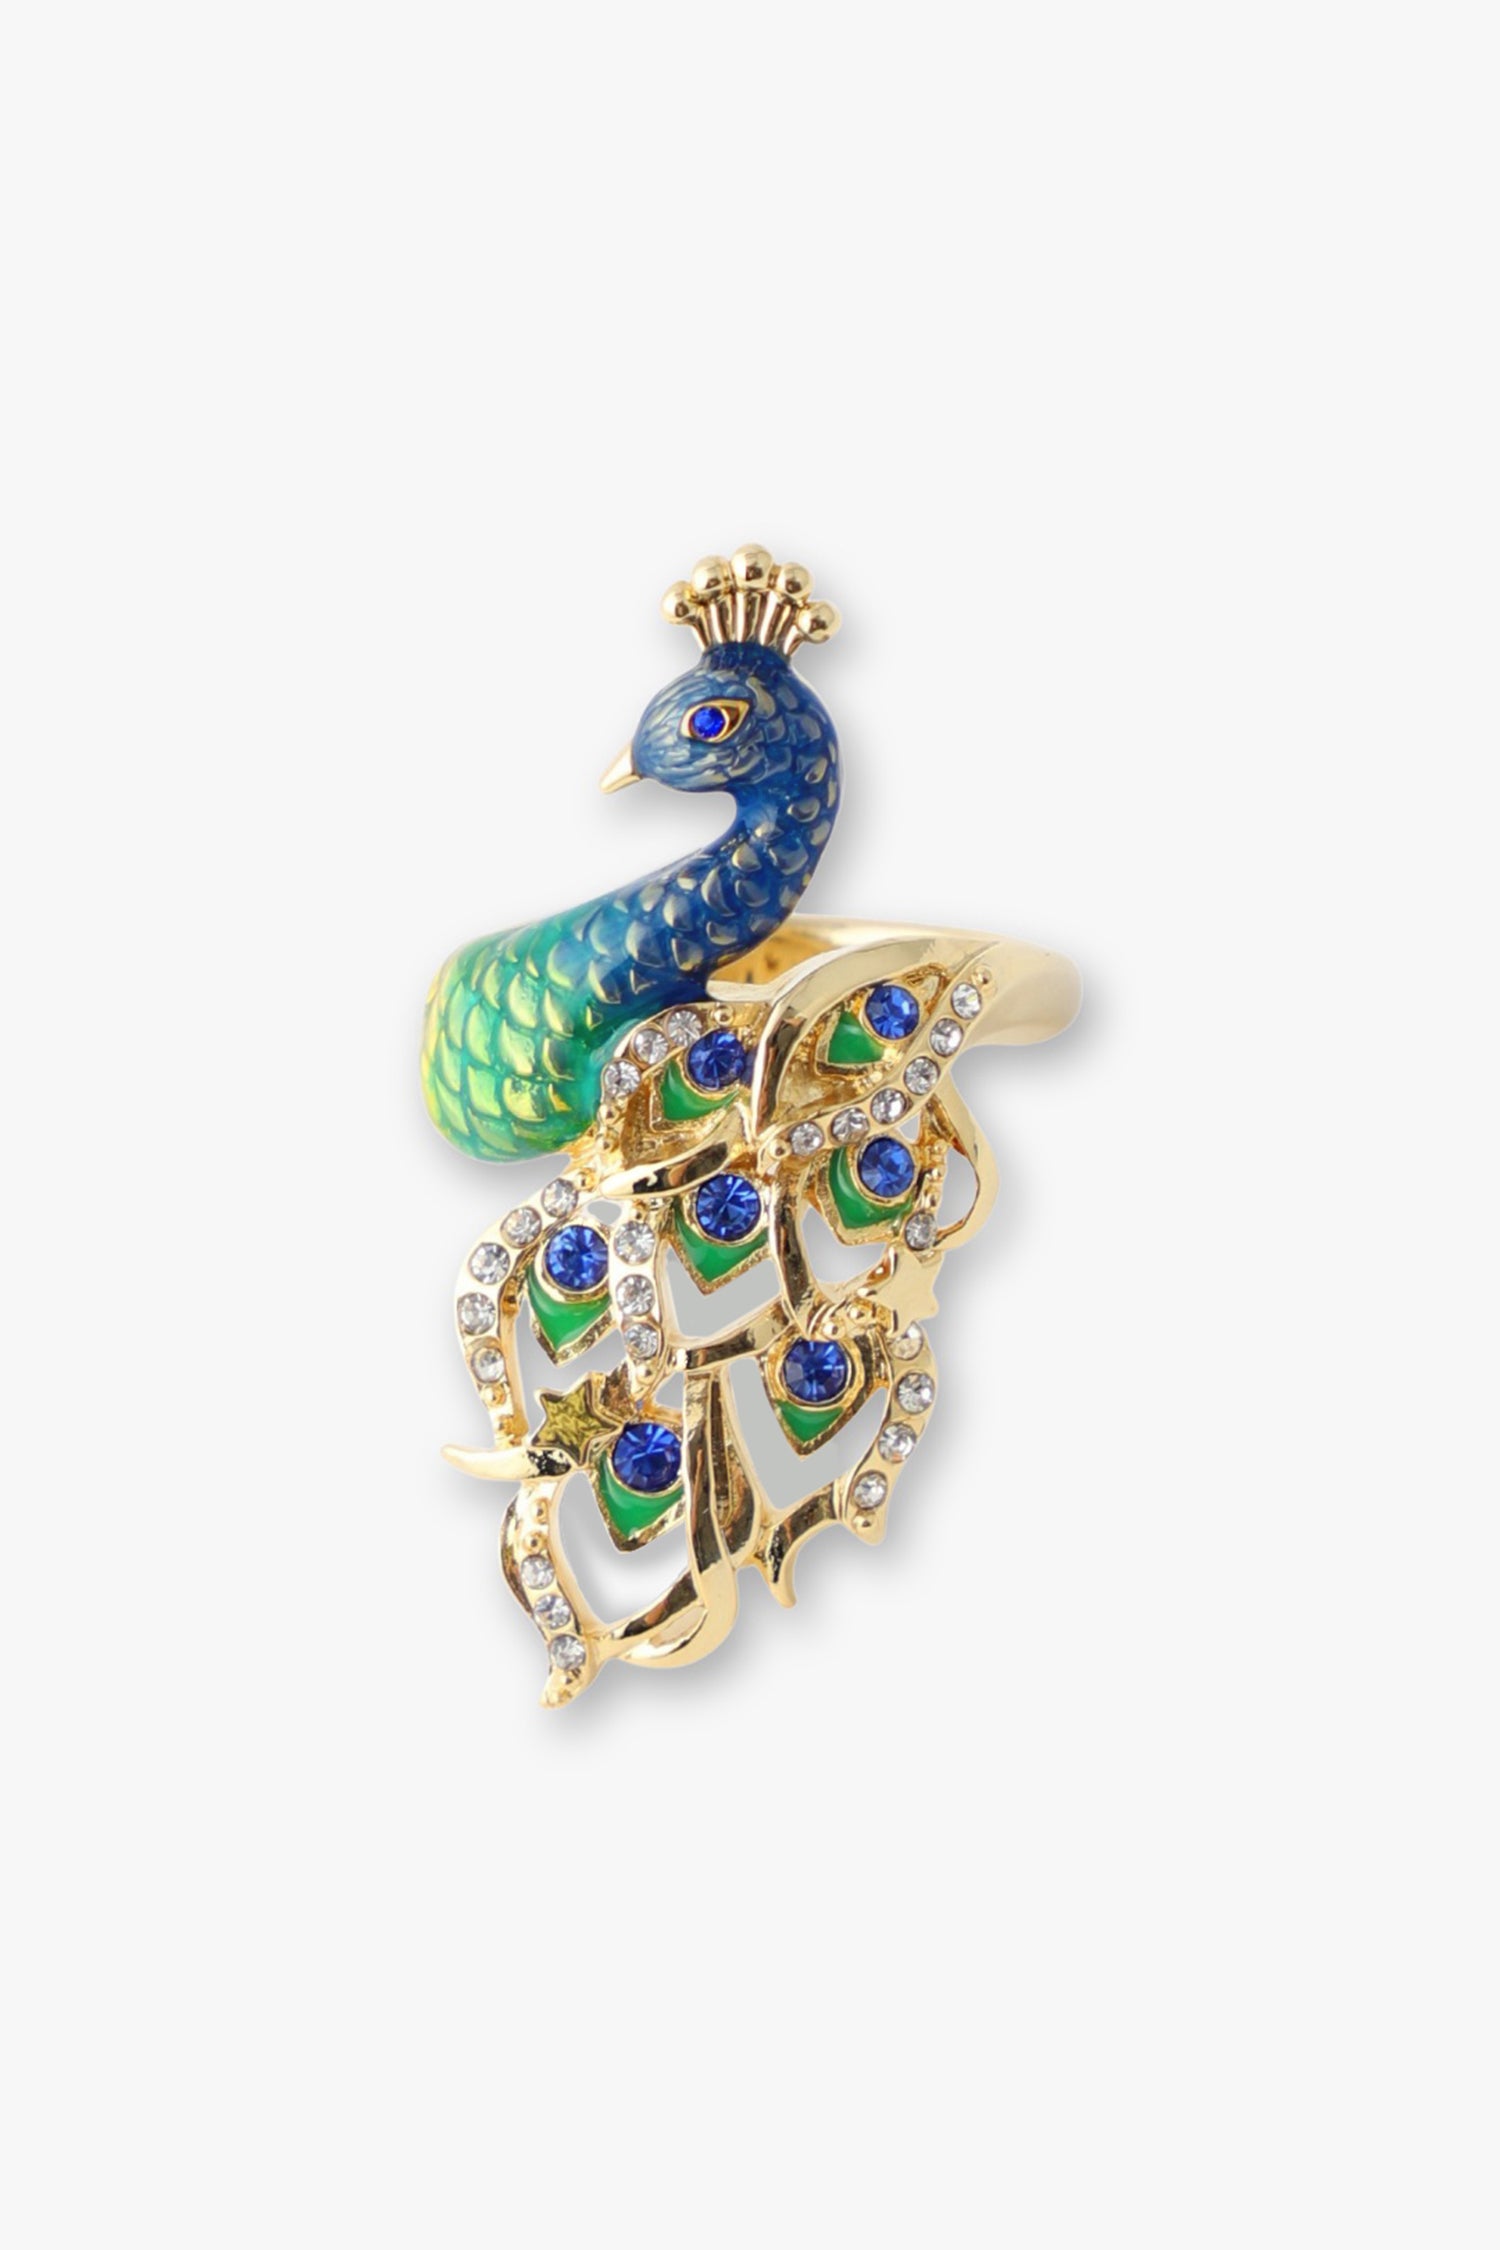 Peacock Ring, Blue and green peacock with enamel and crystal embellished feathers, hollow wings